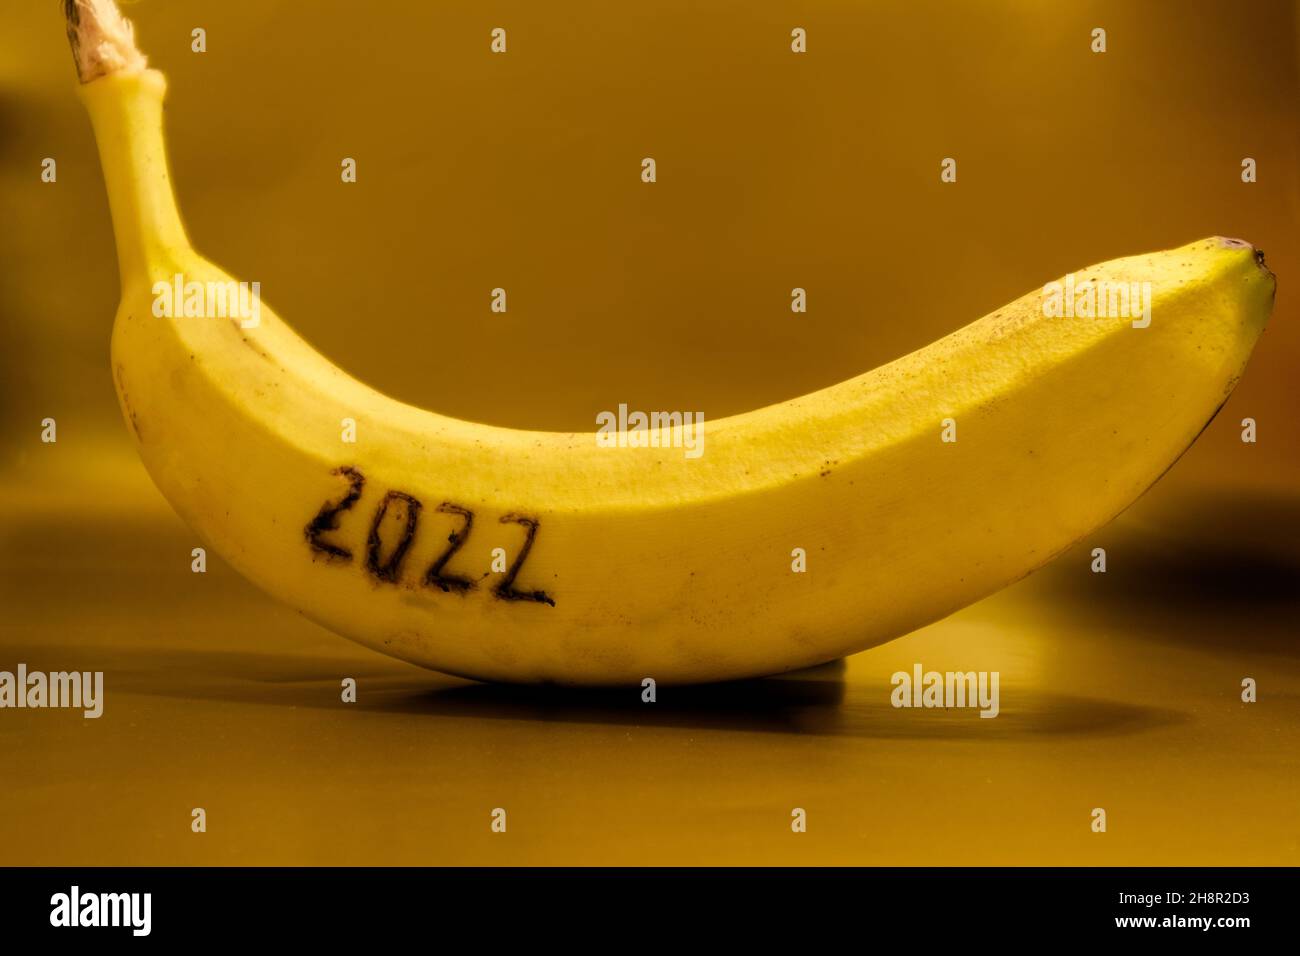 Numeral 2022 on a ripe yellow banana against a gold background. Stock Photo